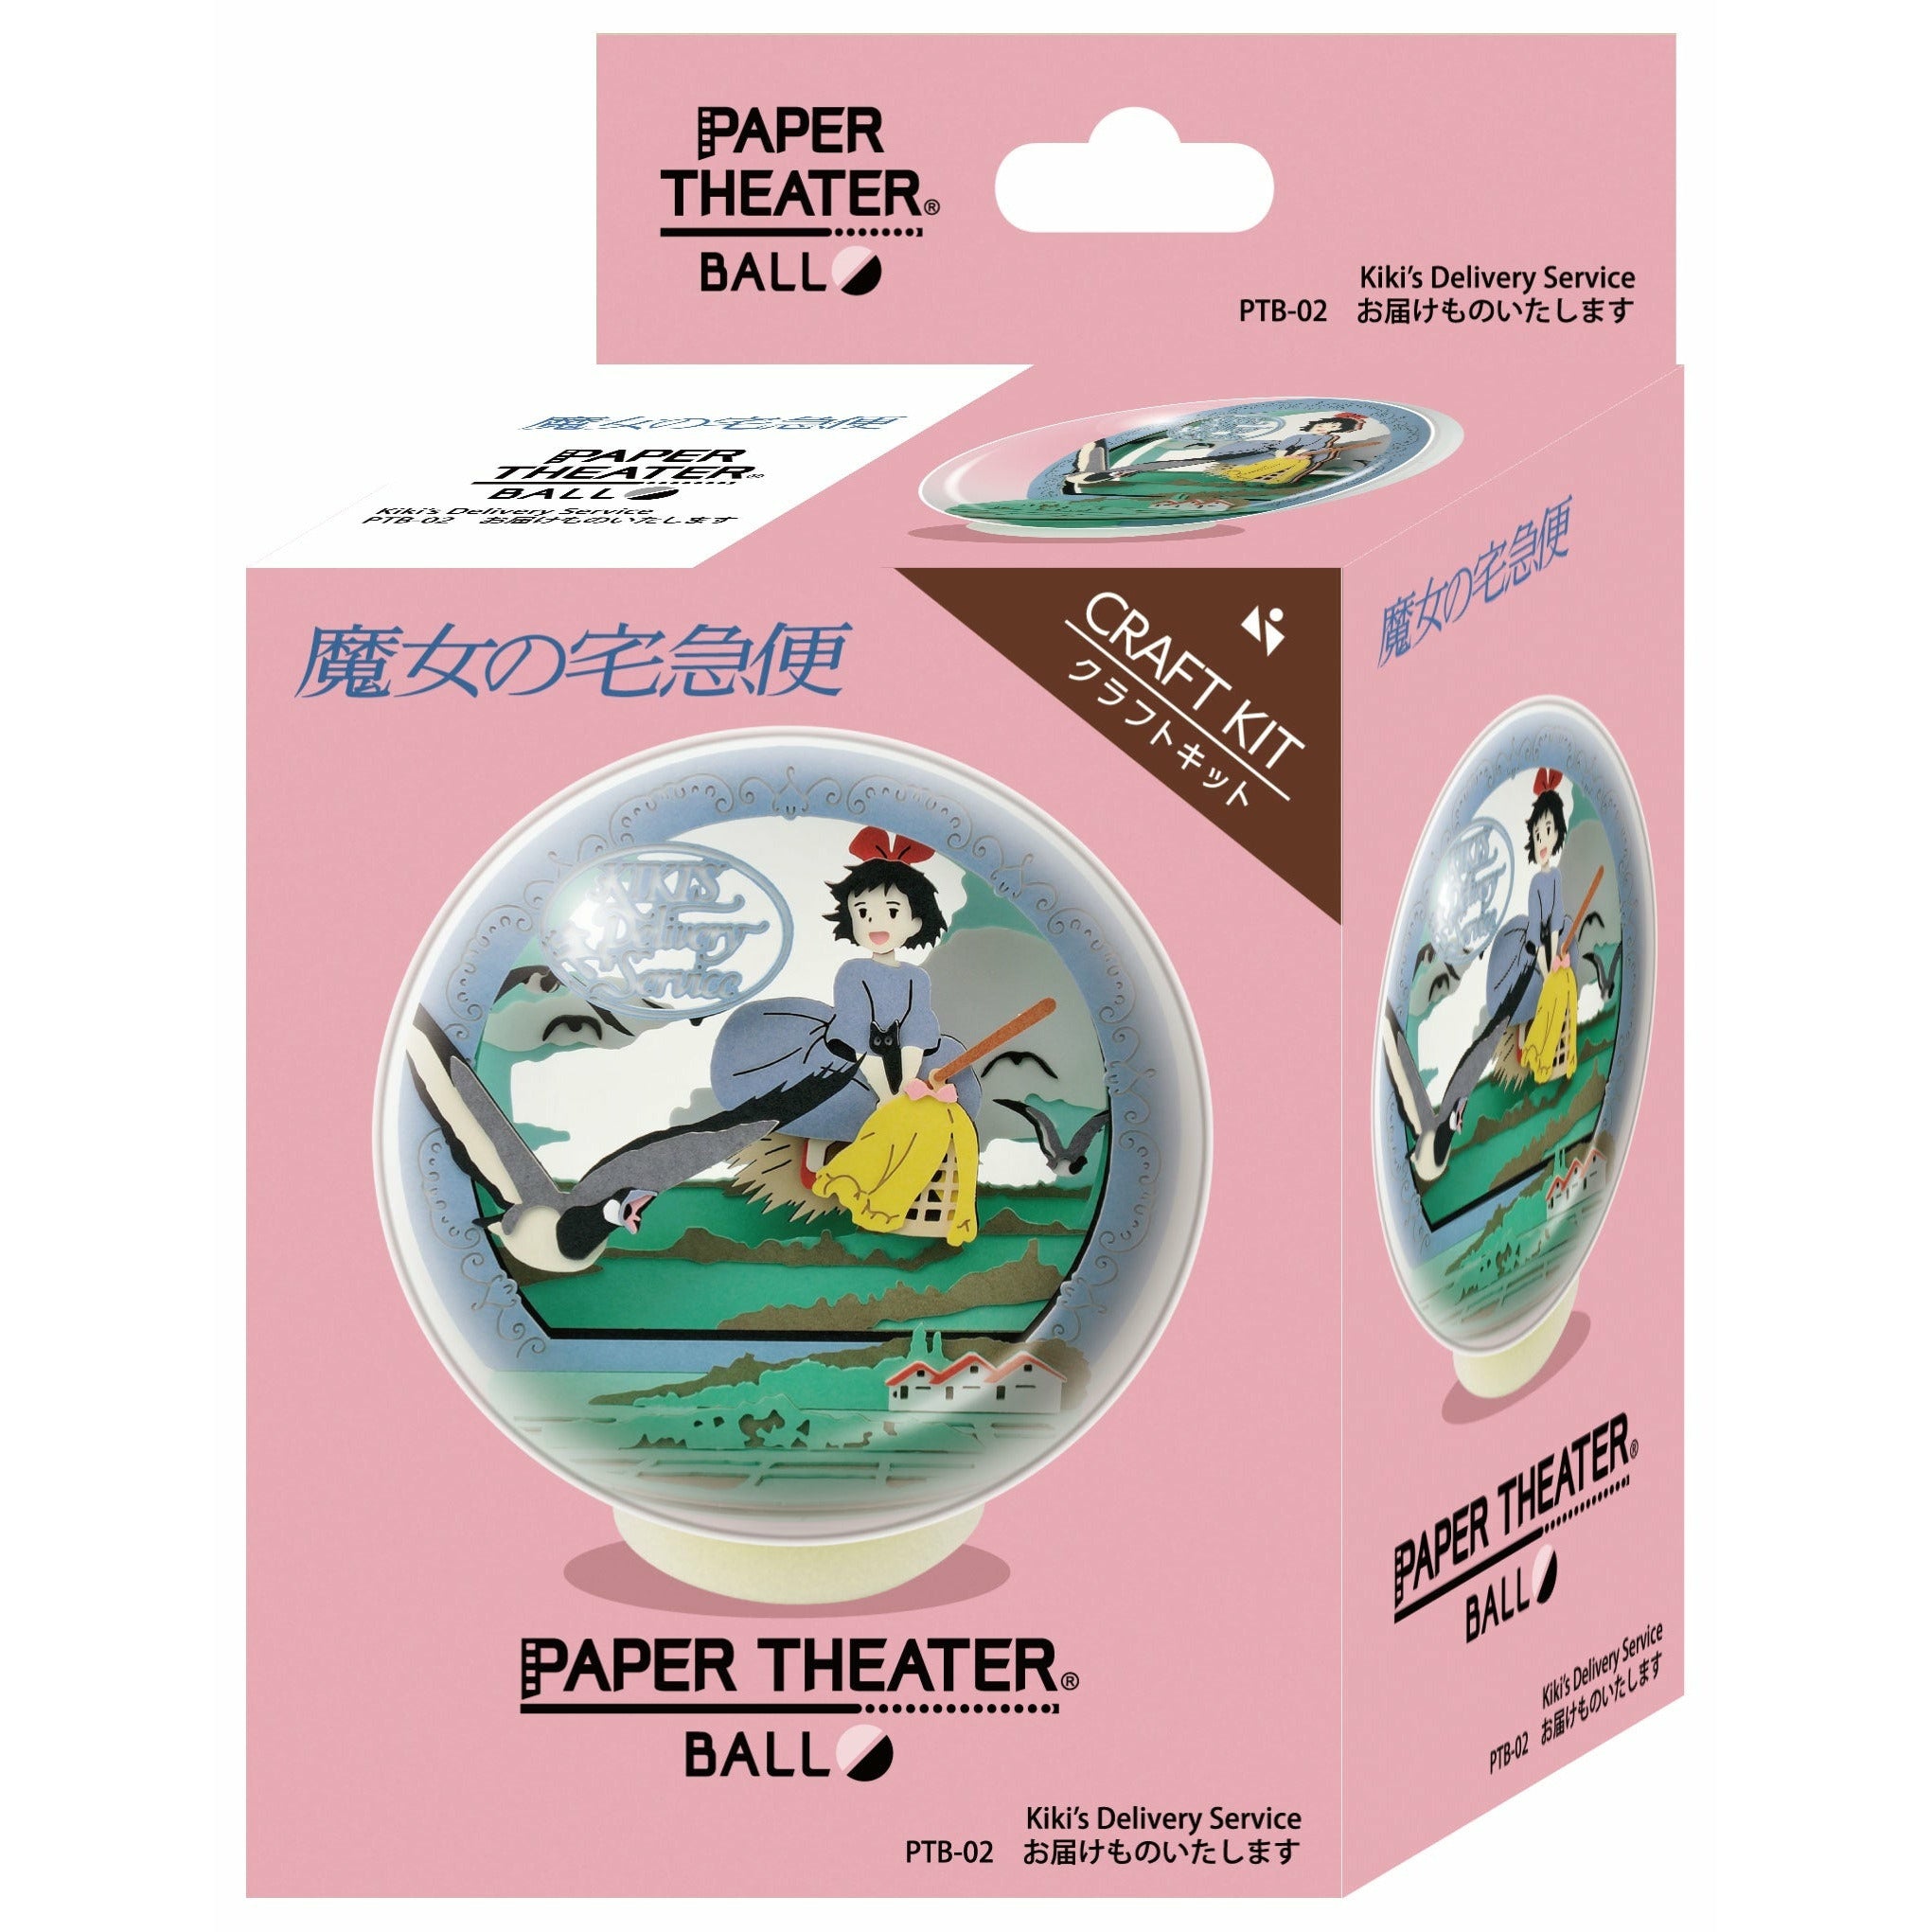 Kiki's Delivery Service On Delivery Paper Theater Ball